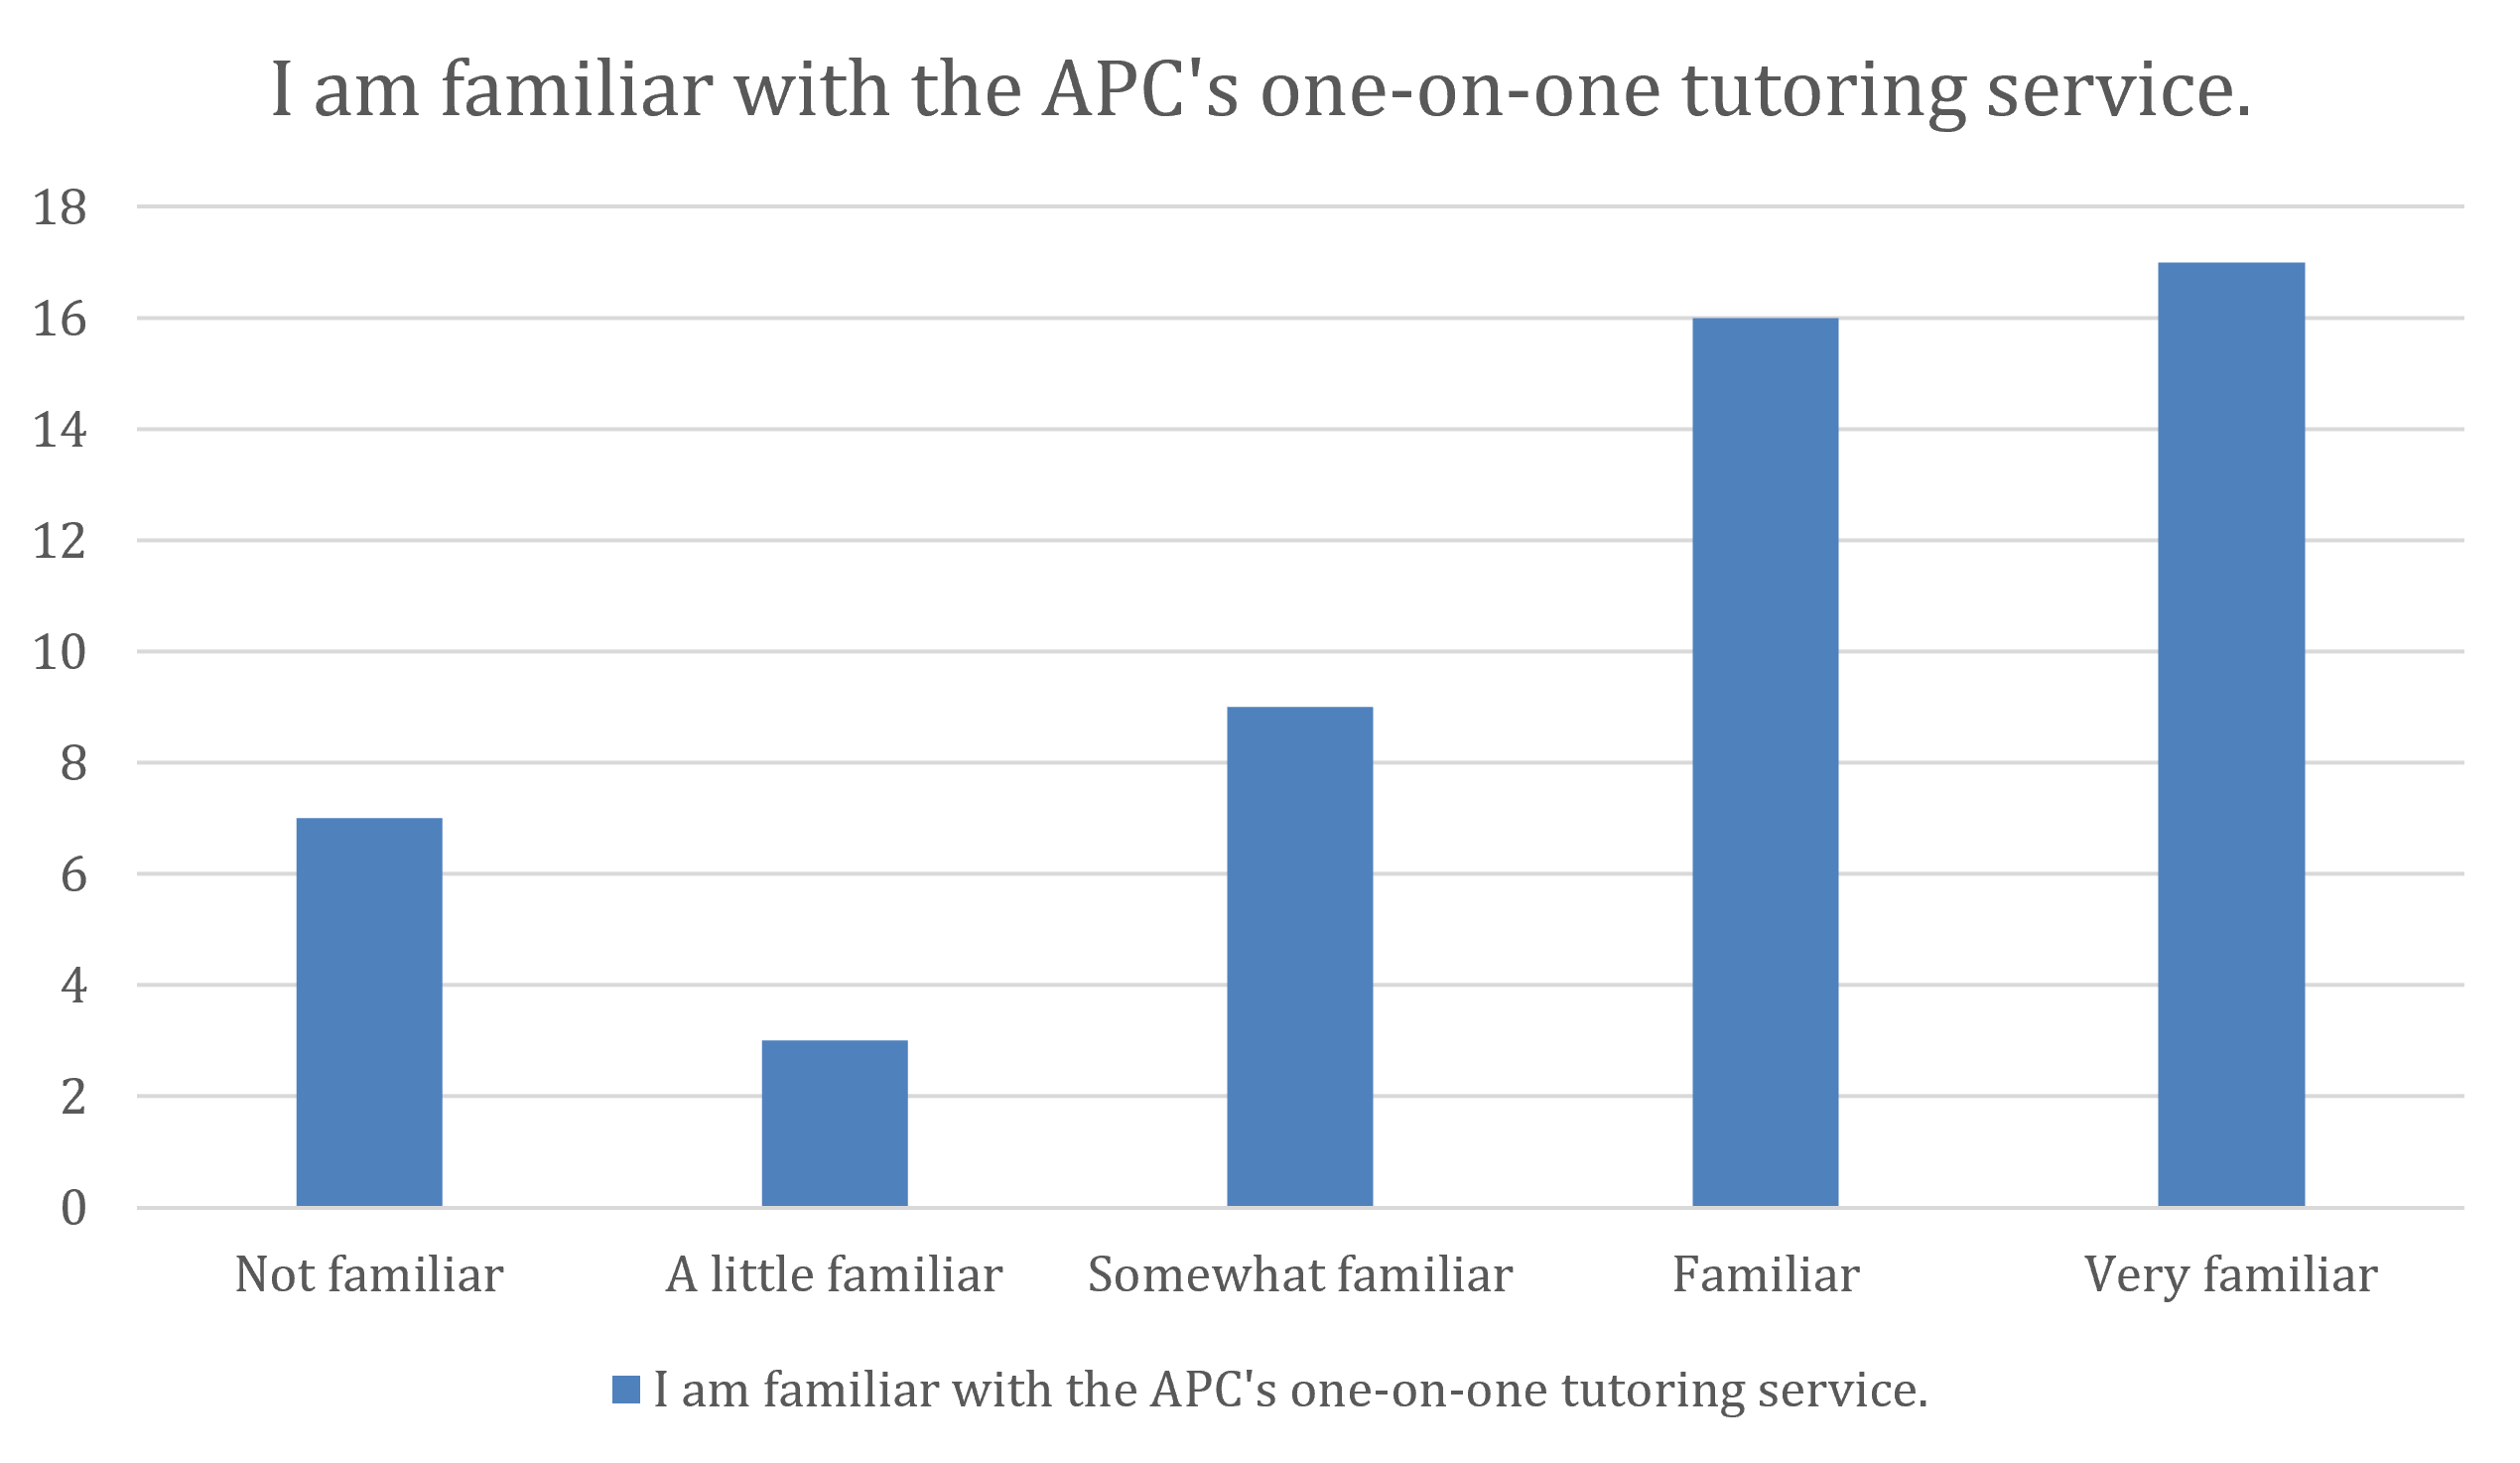 I am familiar with the APC’s one-on-one tutoring service.